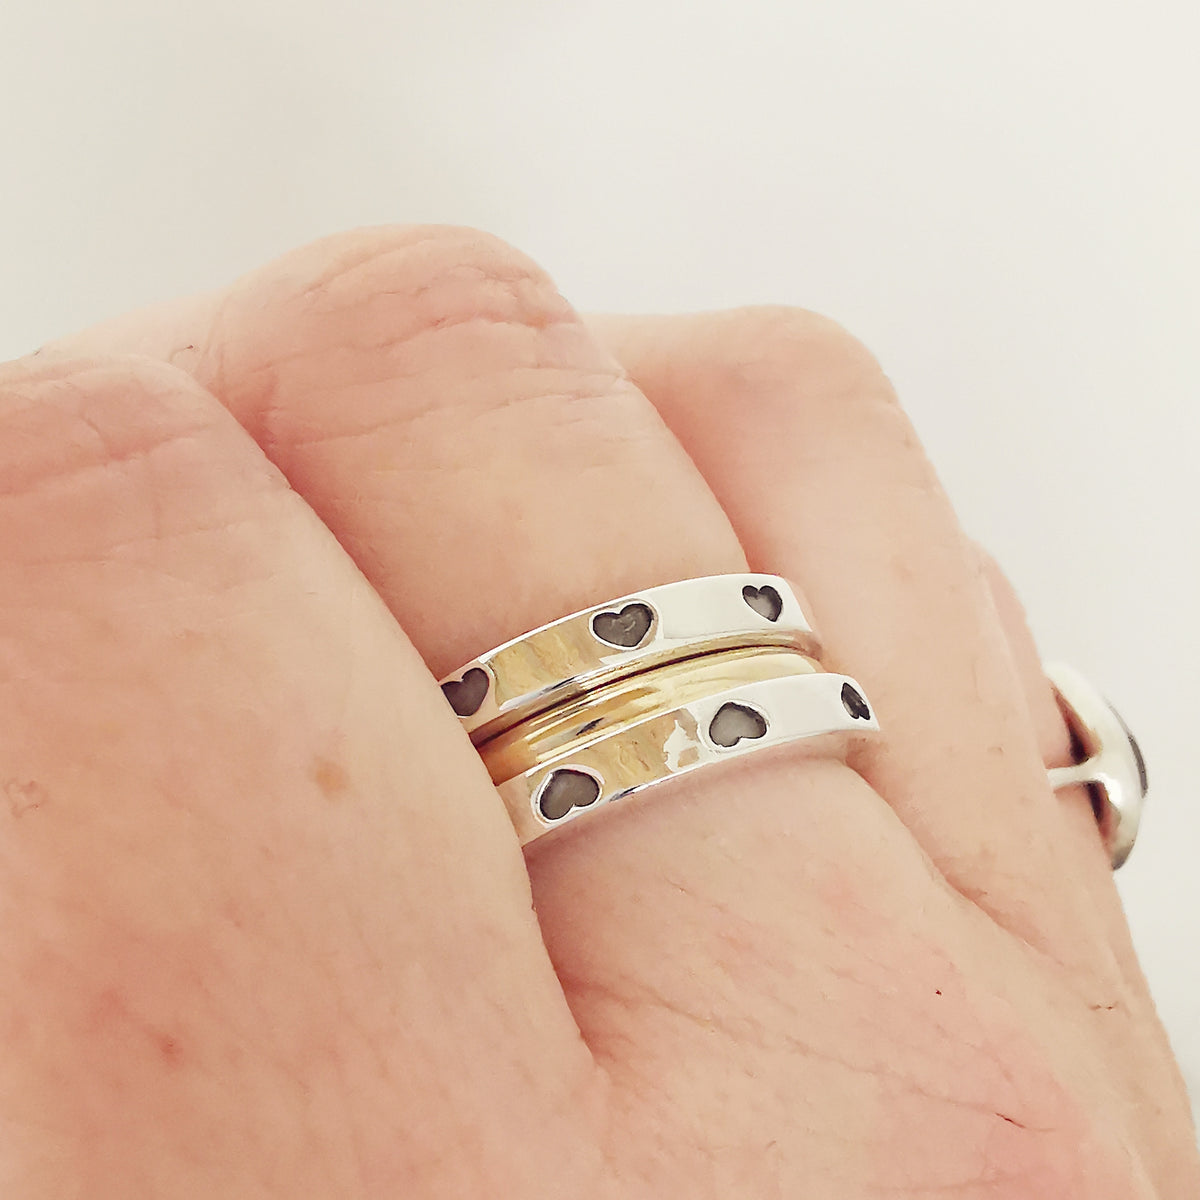 heart stacking rings silver with solid gold central band from Scarlett Jewellery UKsilver heart stacking ring with solid gold middle Scarlett Jewellery Hove UK